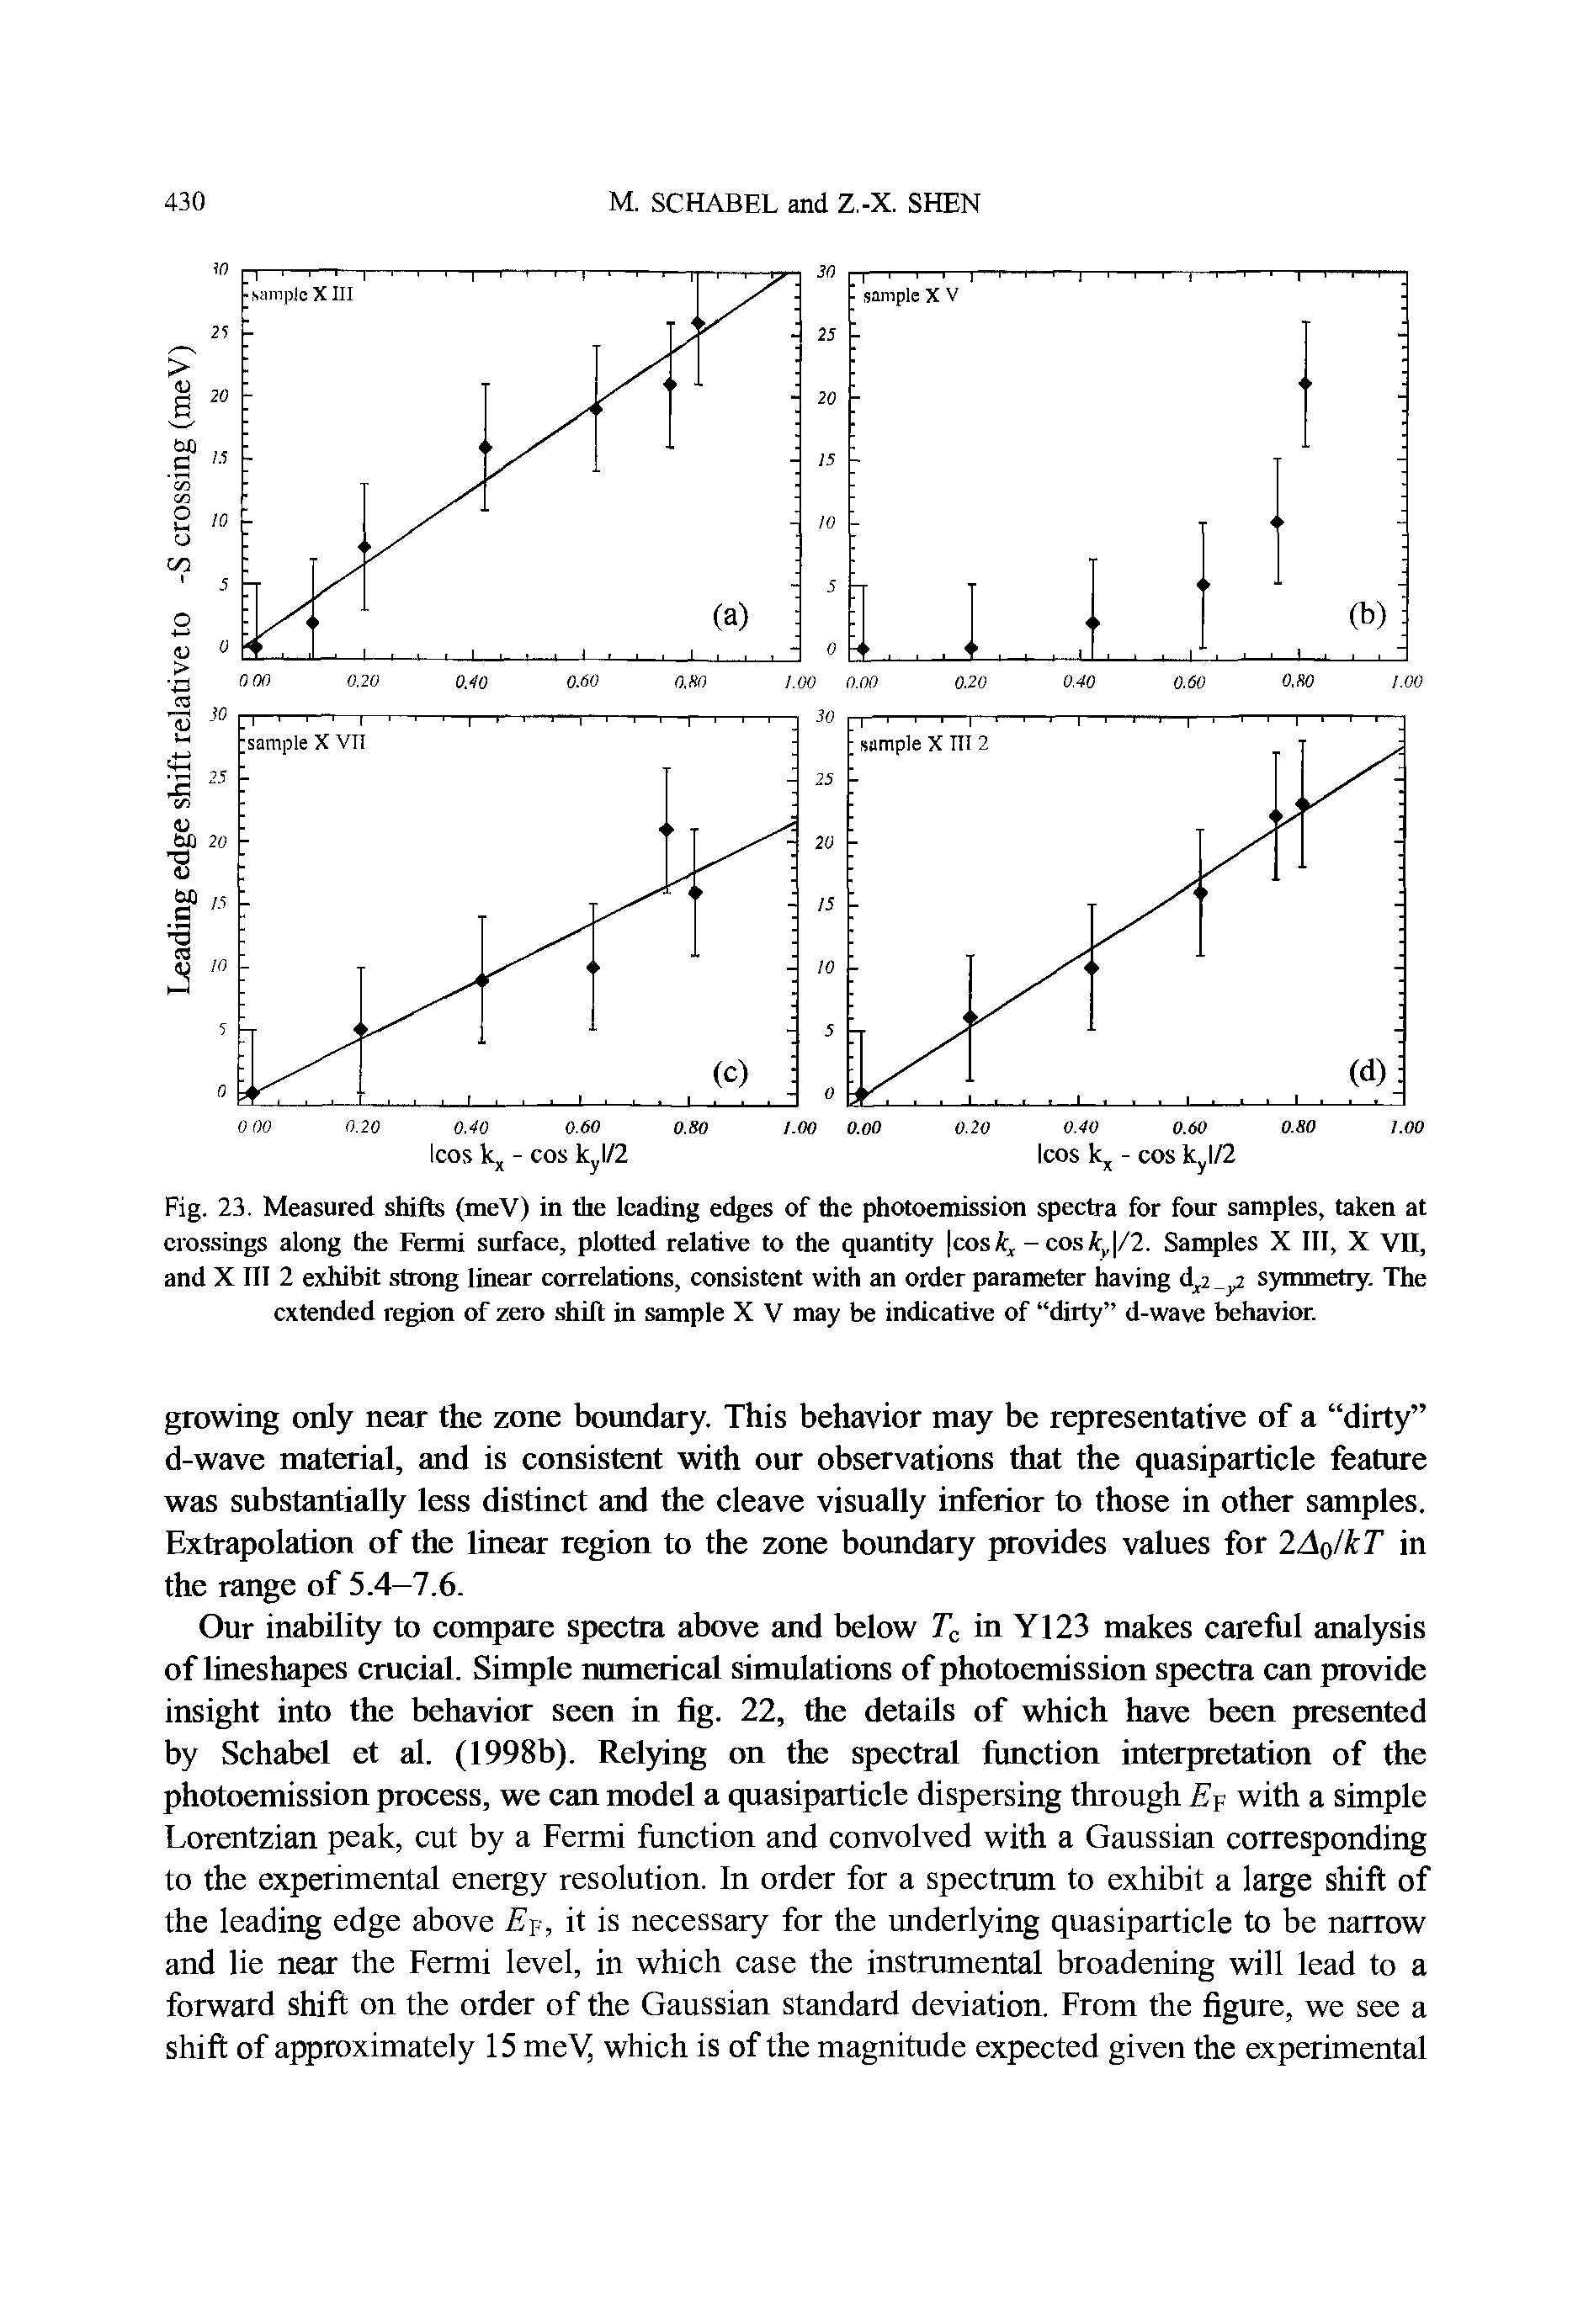 Fig. 23. Measured shifts (meV) in the leading edges of the photoemission spectra for four samples, taken at cro.ssings along the Fermi surface, plotted relative to the quantity (cos, -cosA /2. Samples X III, X vn, and X III 2 exliibit strong linear correlations, consistent with an order parameter having d 2 symmetry. The extended region of zero shift in sample X V may be indicative of dirty d-wave behavior.